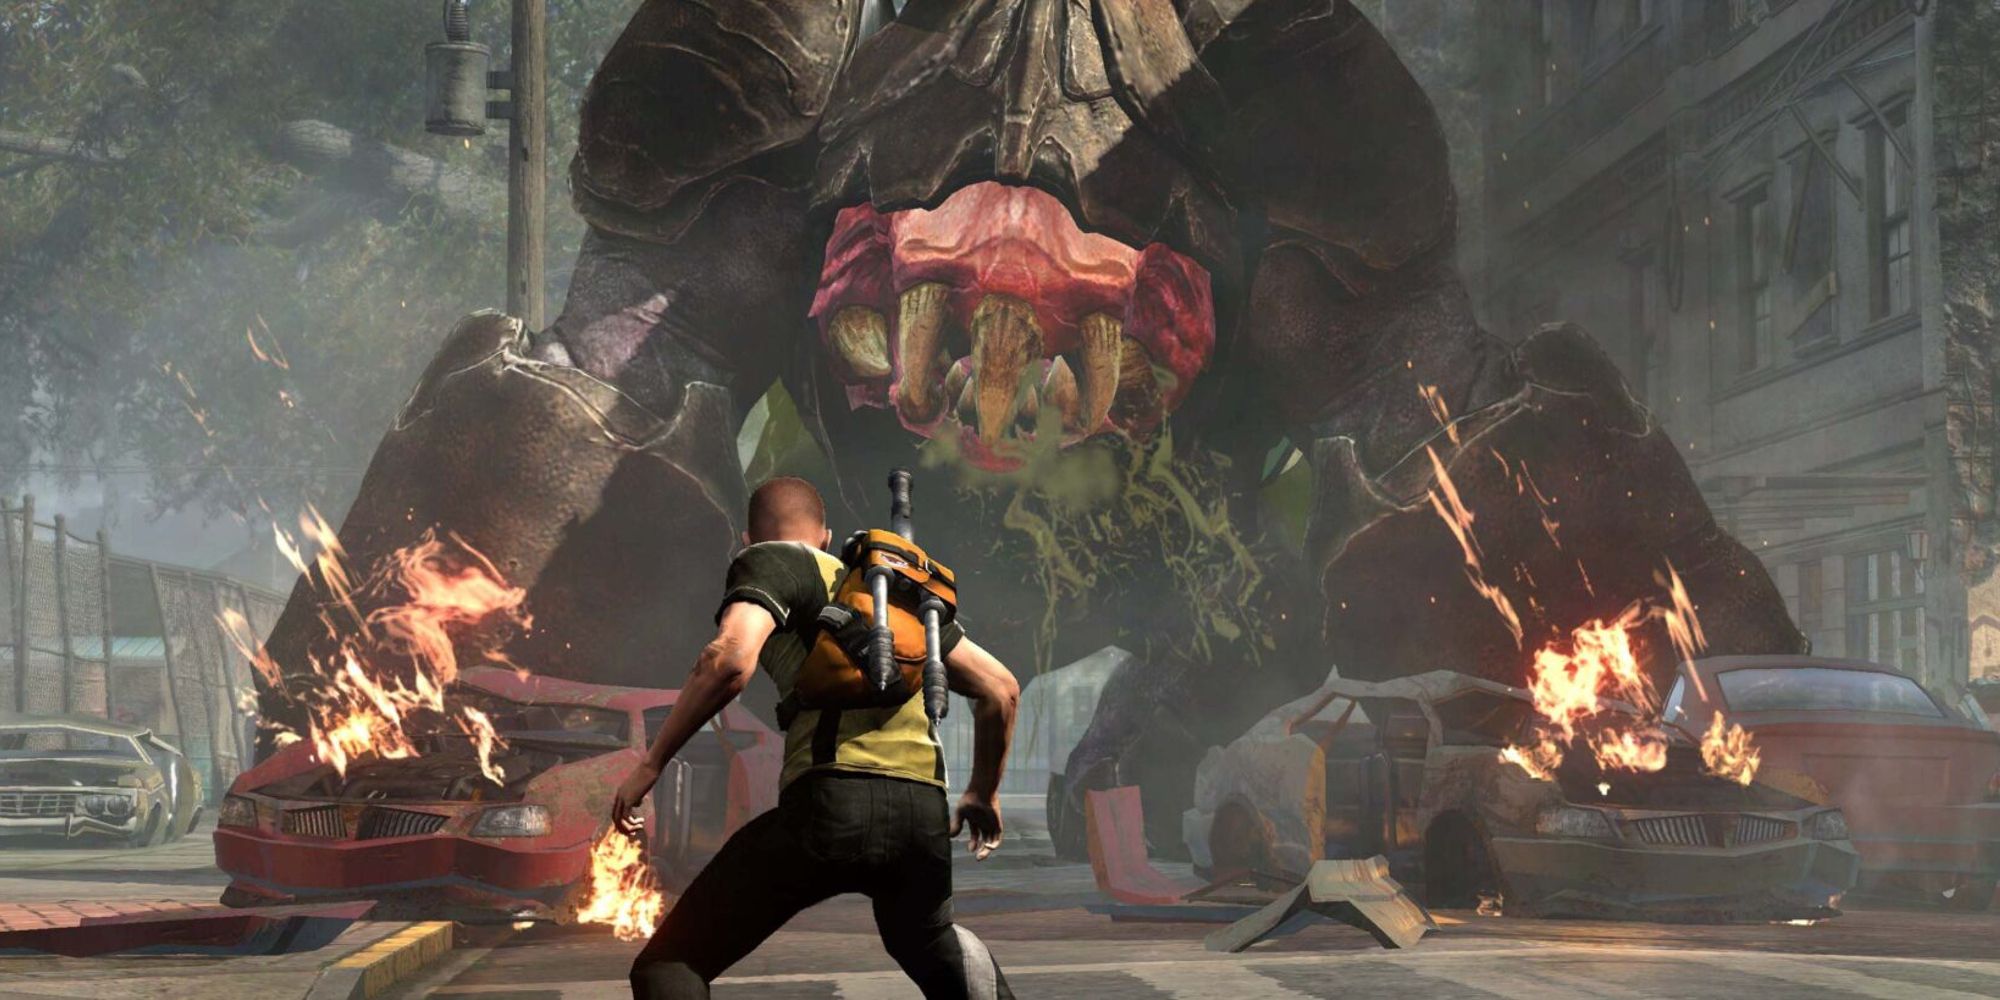 Cole fighting a giant monster in Infamous 2